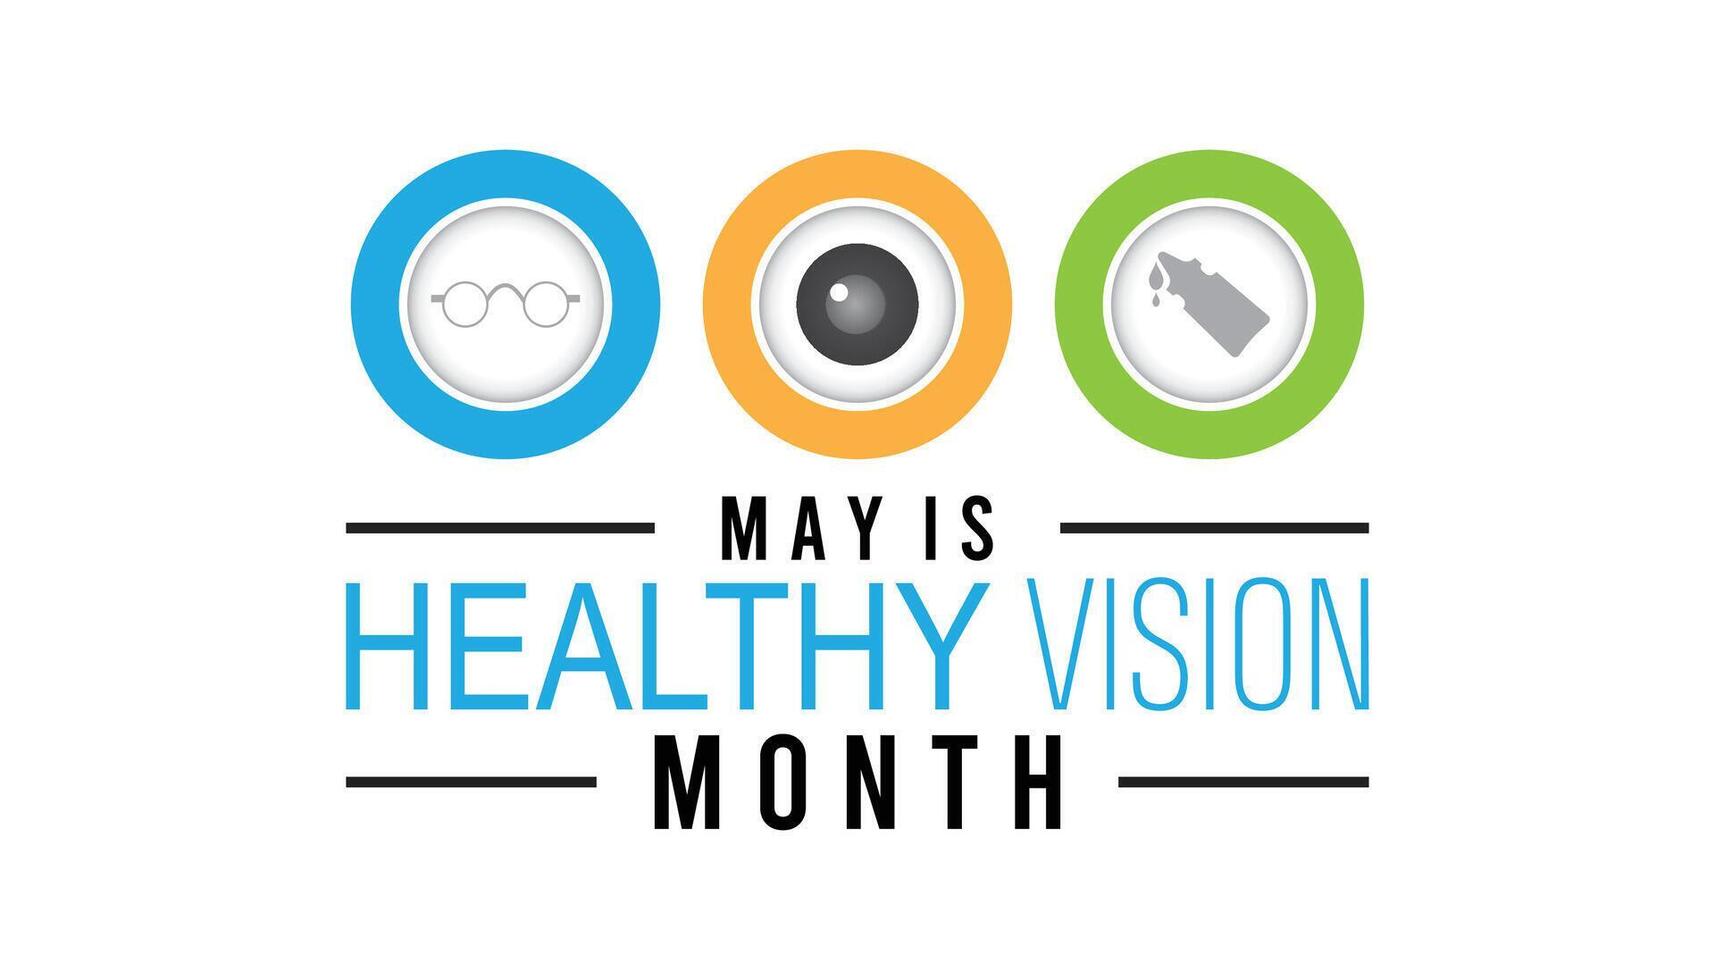 Healthy Vision Month observed every year in May. Template for background, banner, card, poster with text inscription. vector